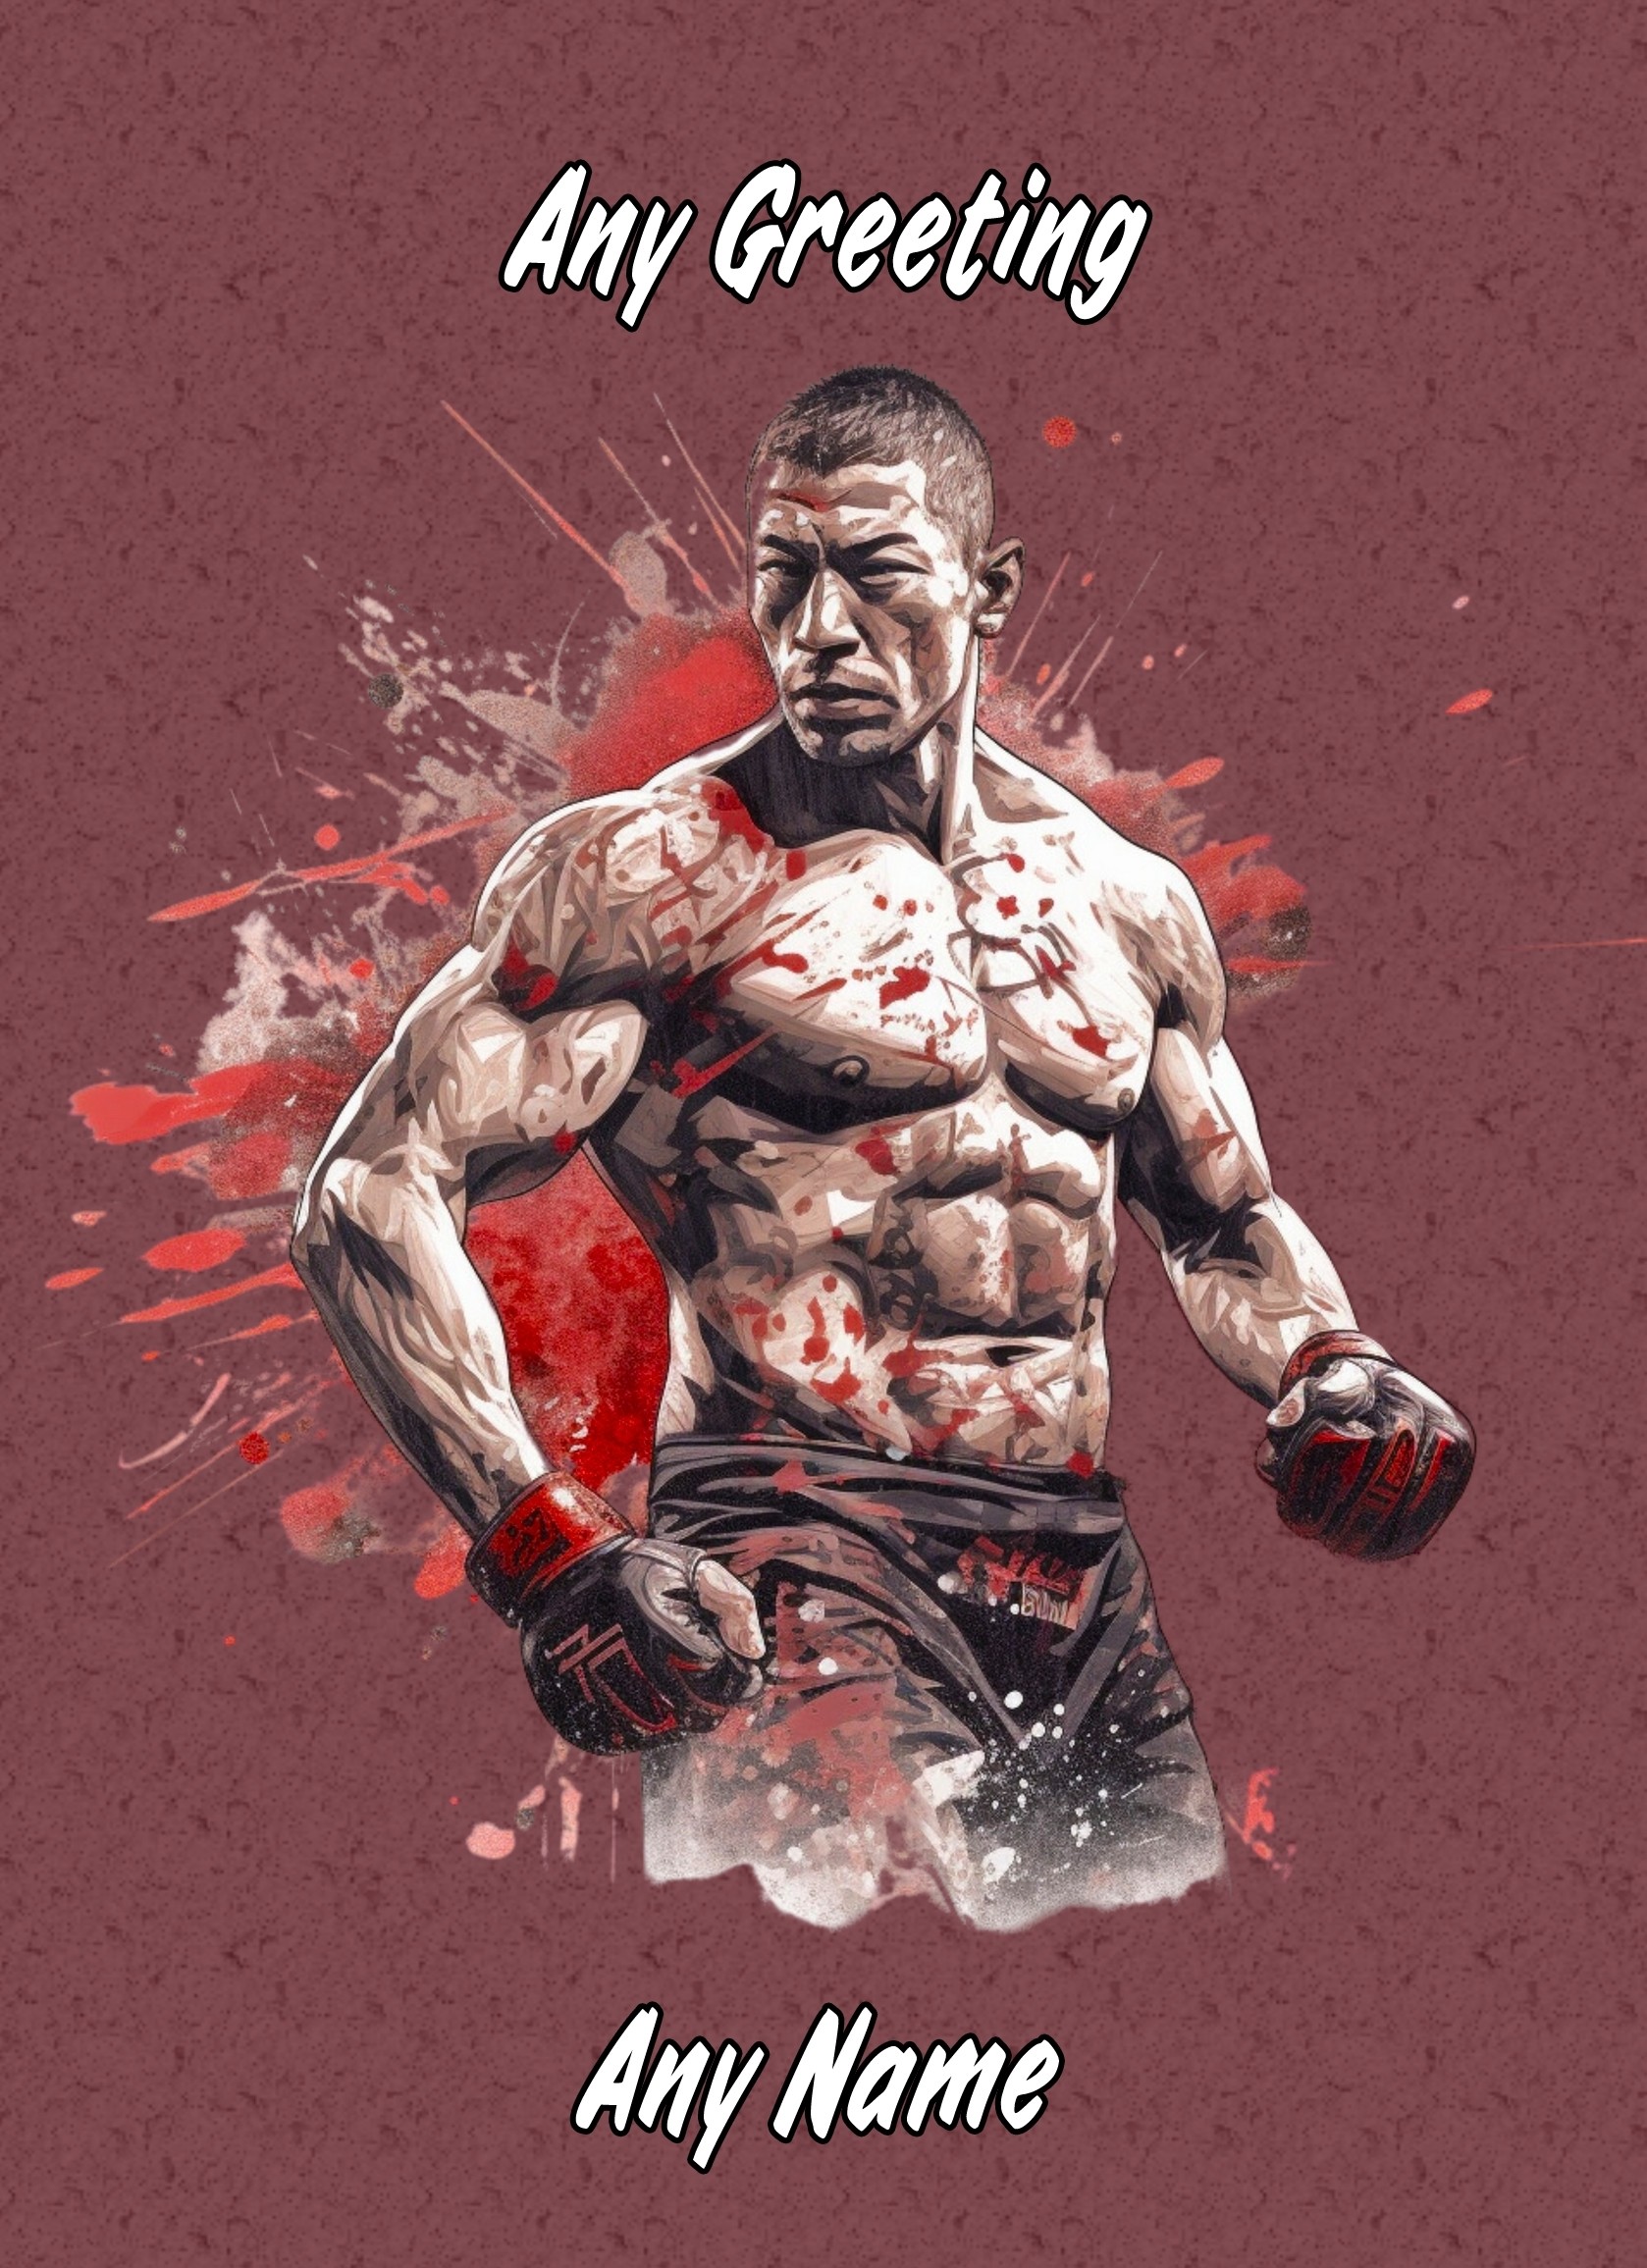 Personalised Mixed Martial Arts Greeting Card Design 2 (Birthday, Christmas, Any Occasion)